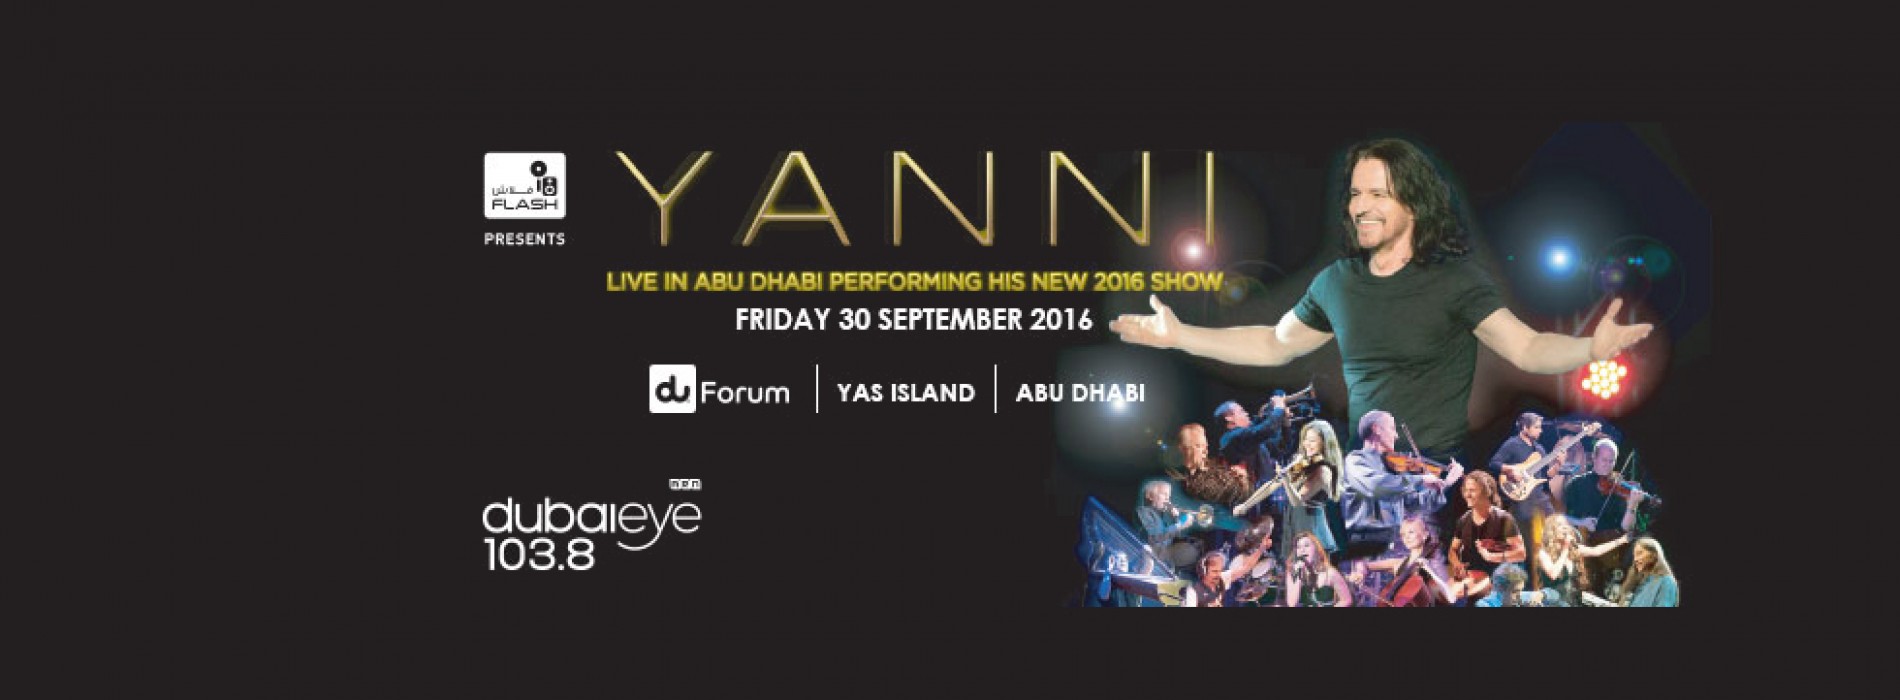 Yanni set to scintillate Abu Dhabi with his brand new live performance